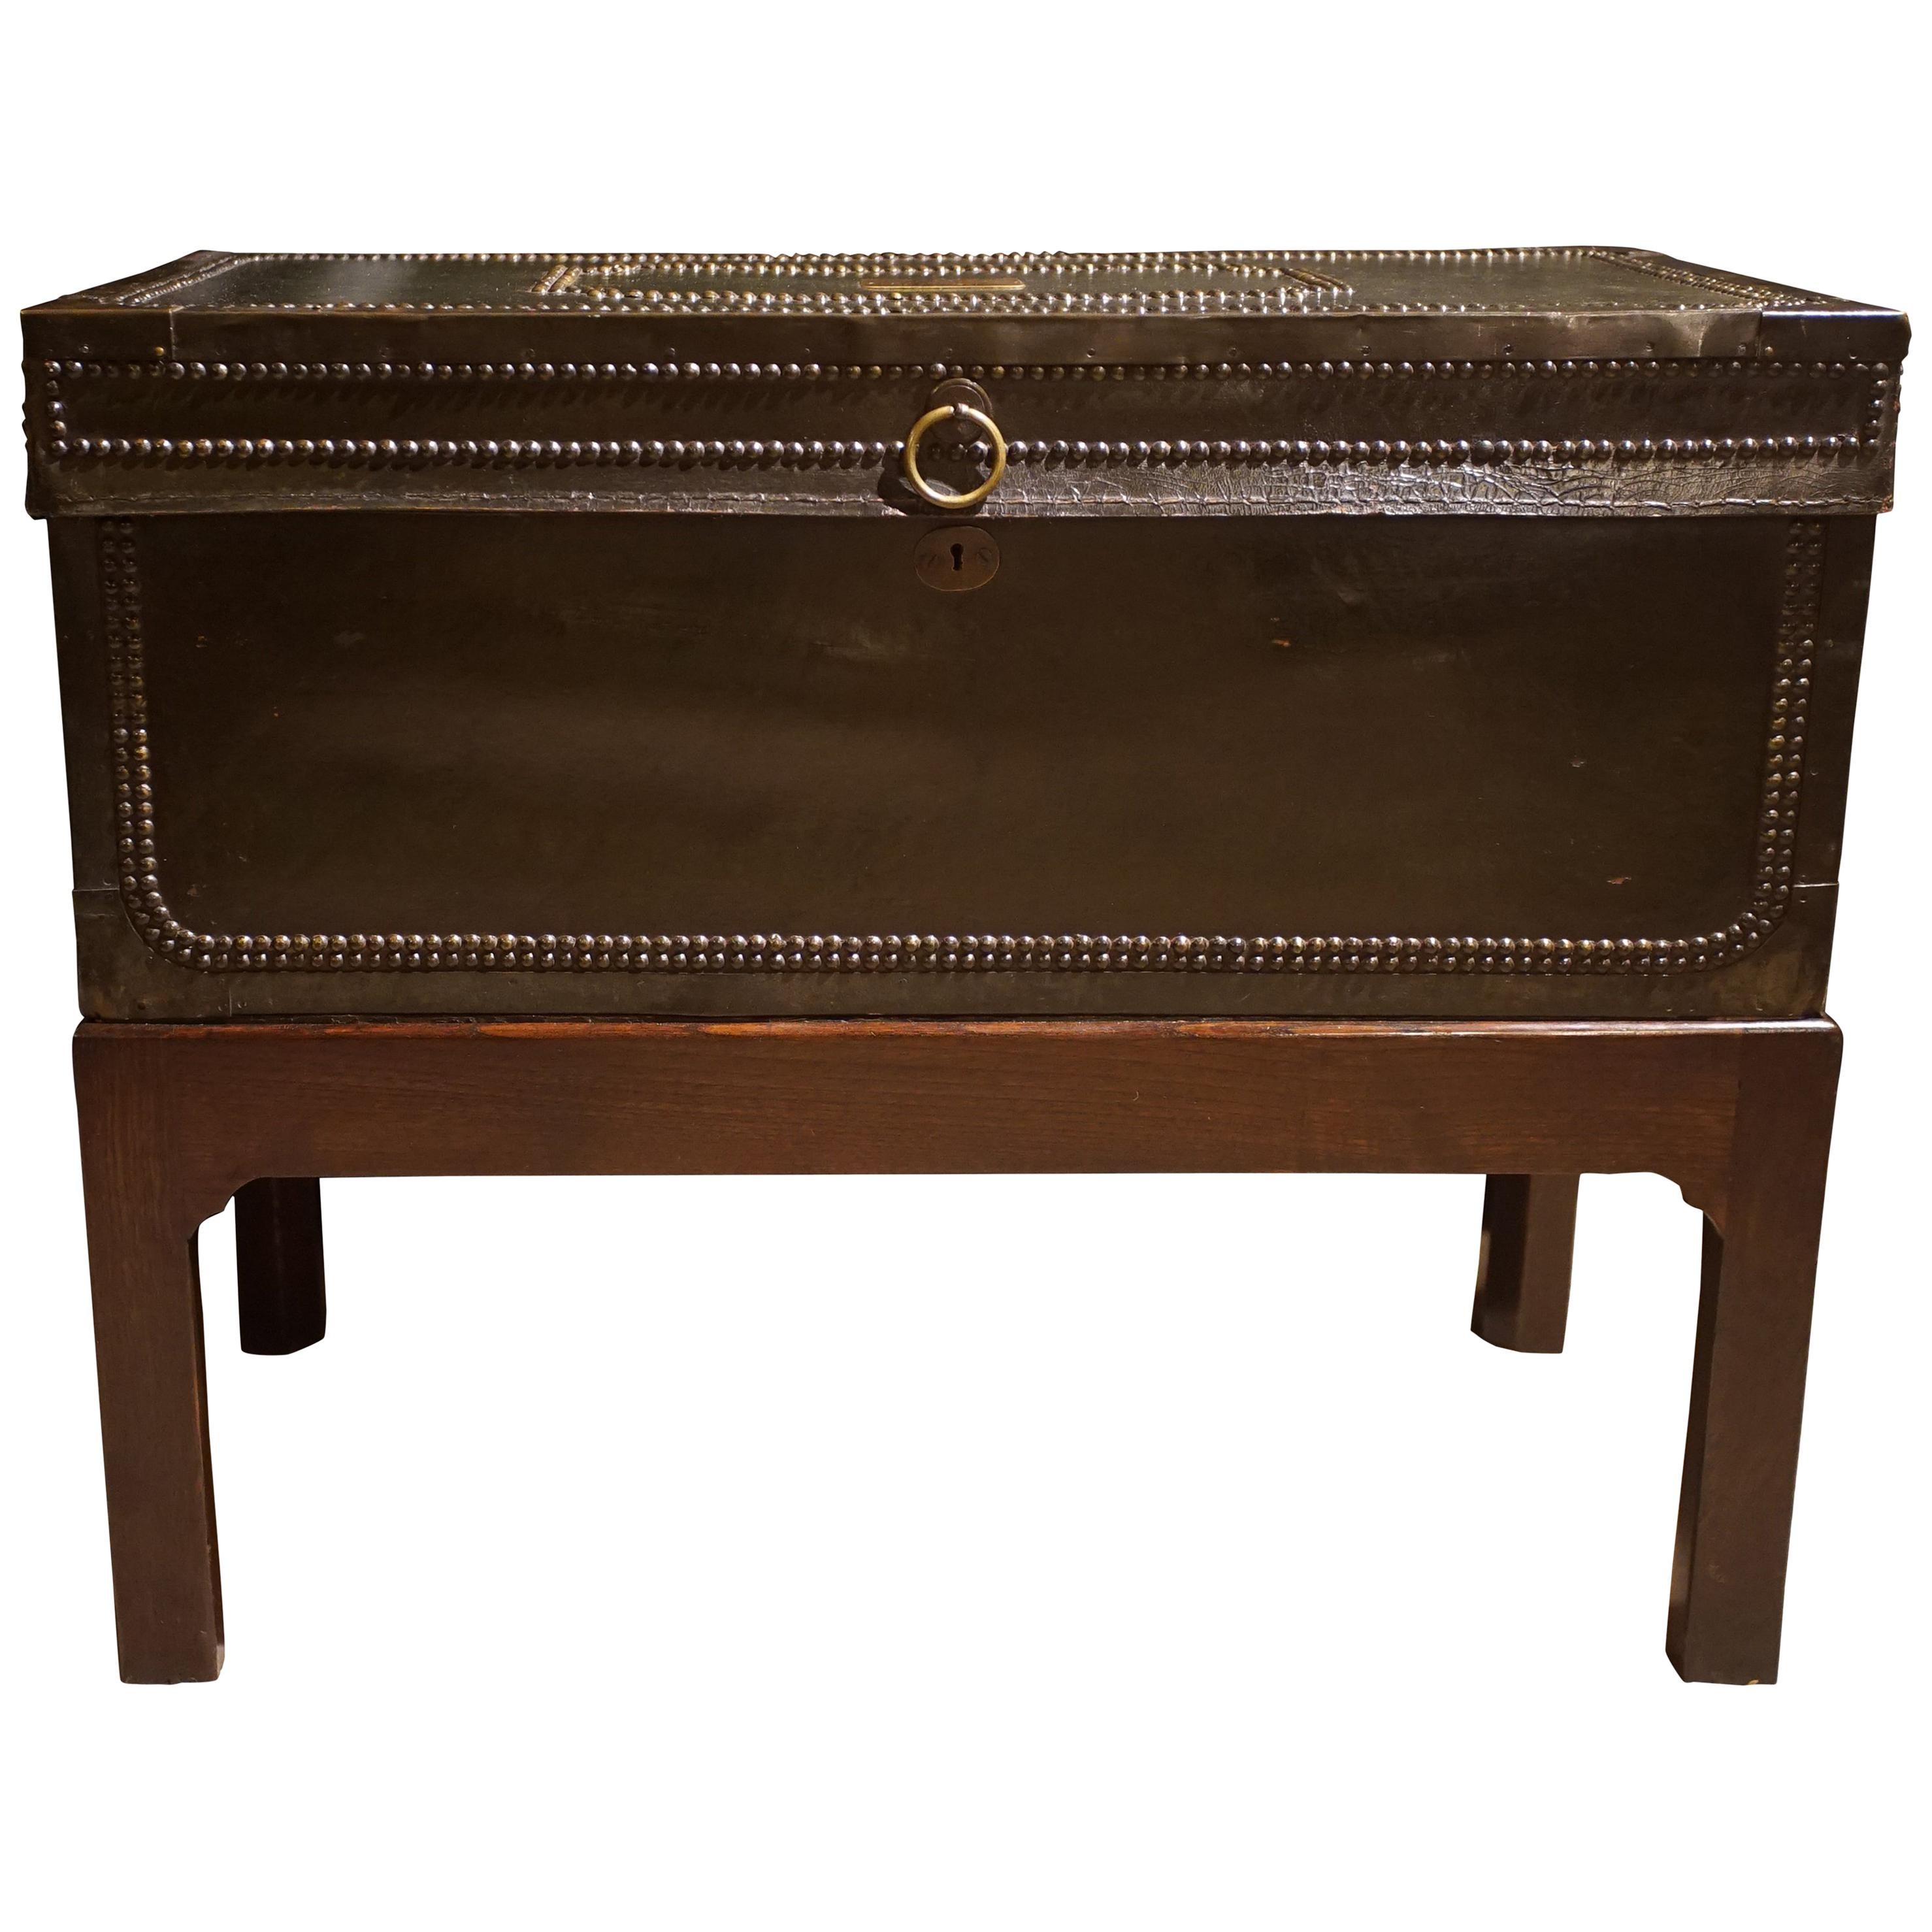 19th Century Chinese Export Leather and Brass Coffer For Sale